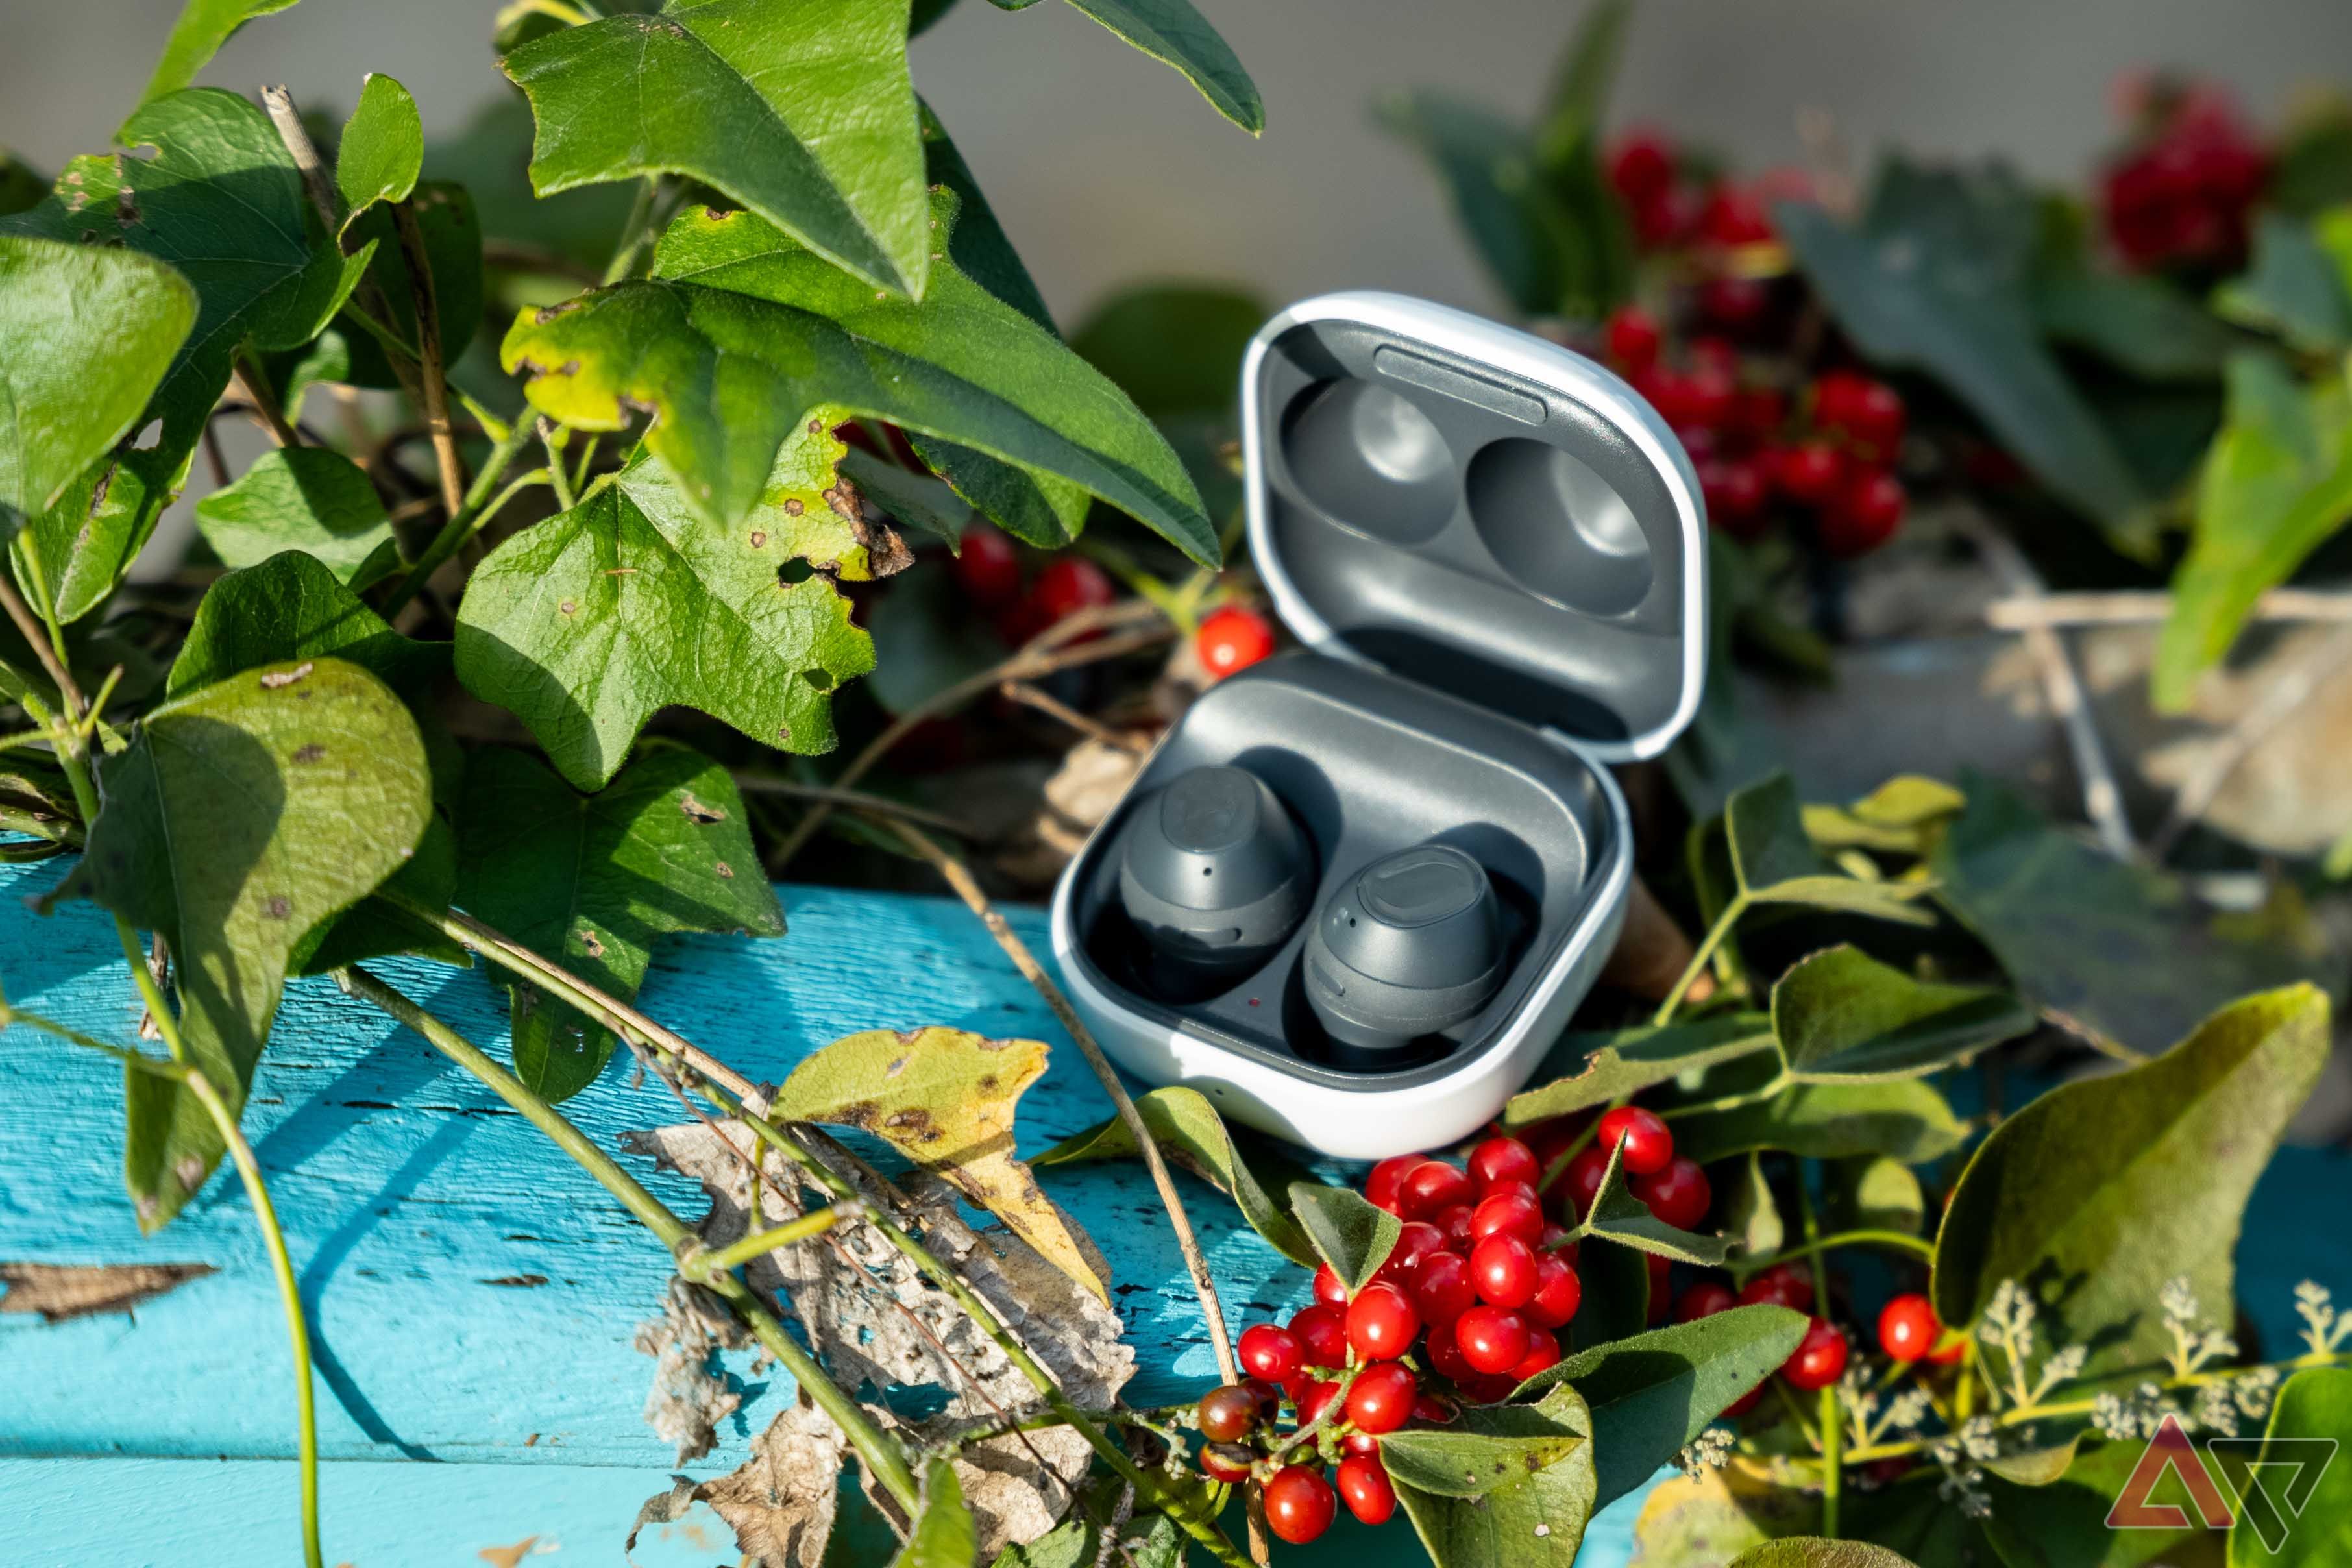 The Samsung Galaxy Buds FE sitting in the open case, surrounded by vines and red berries